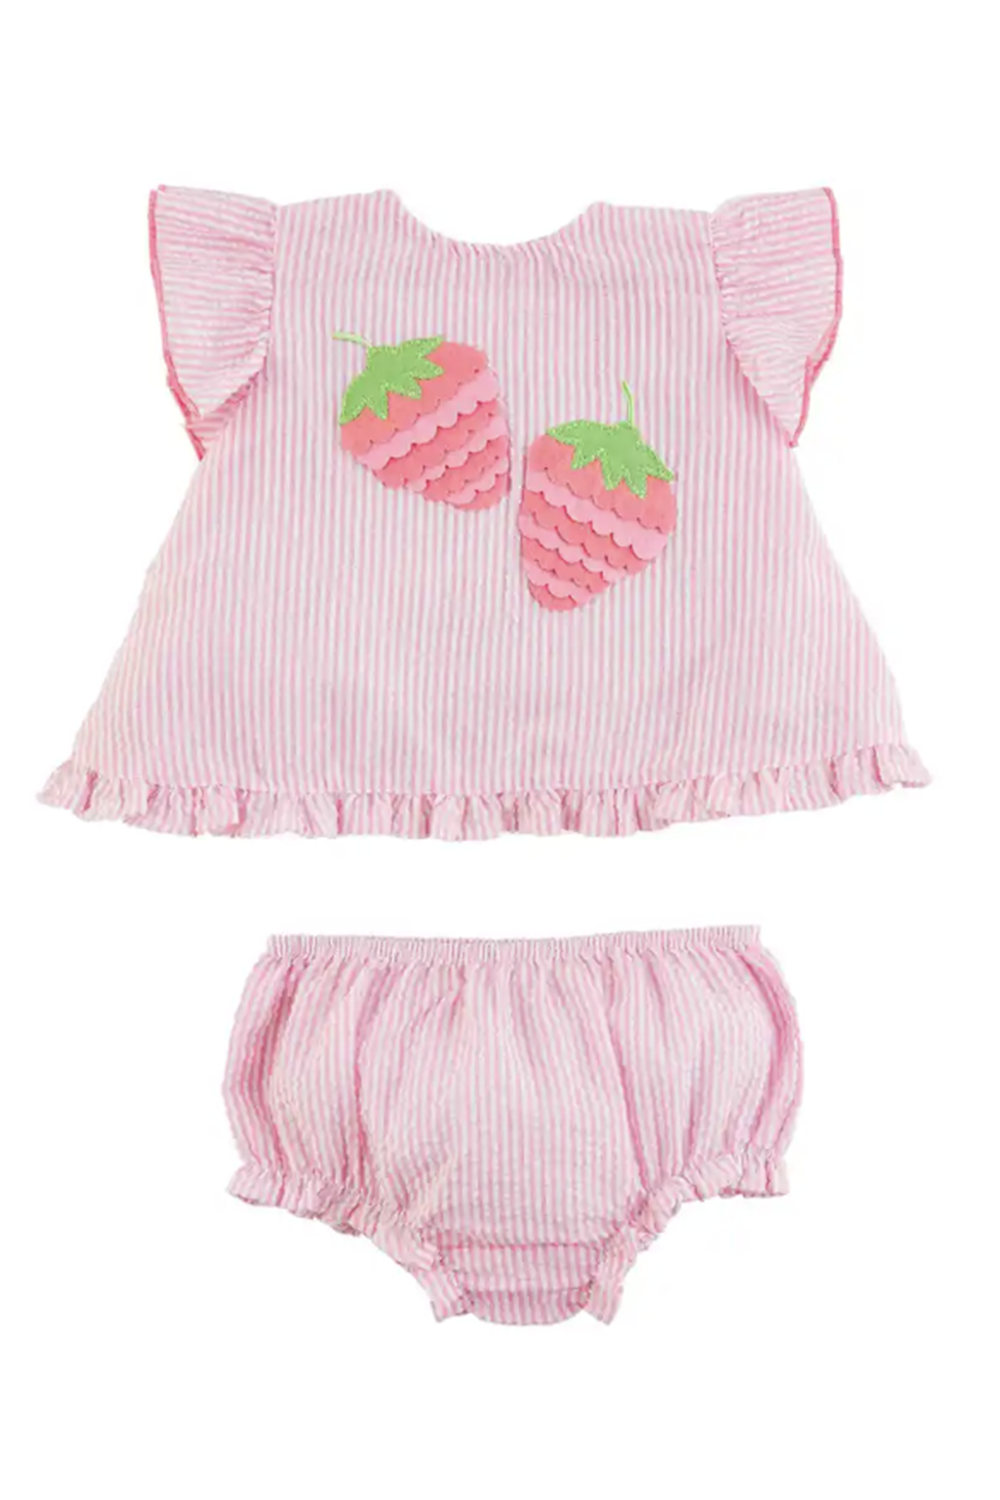 Strawberry Seersucker Pinafore Outfit